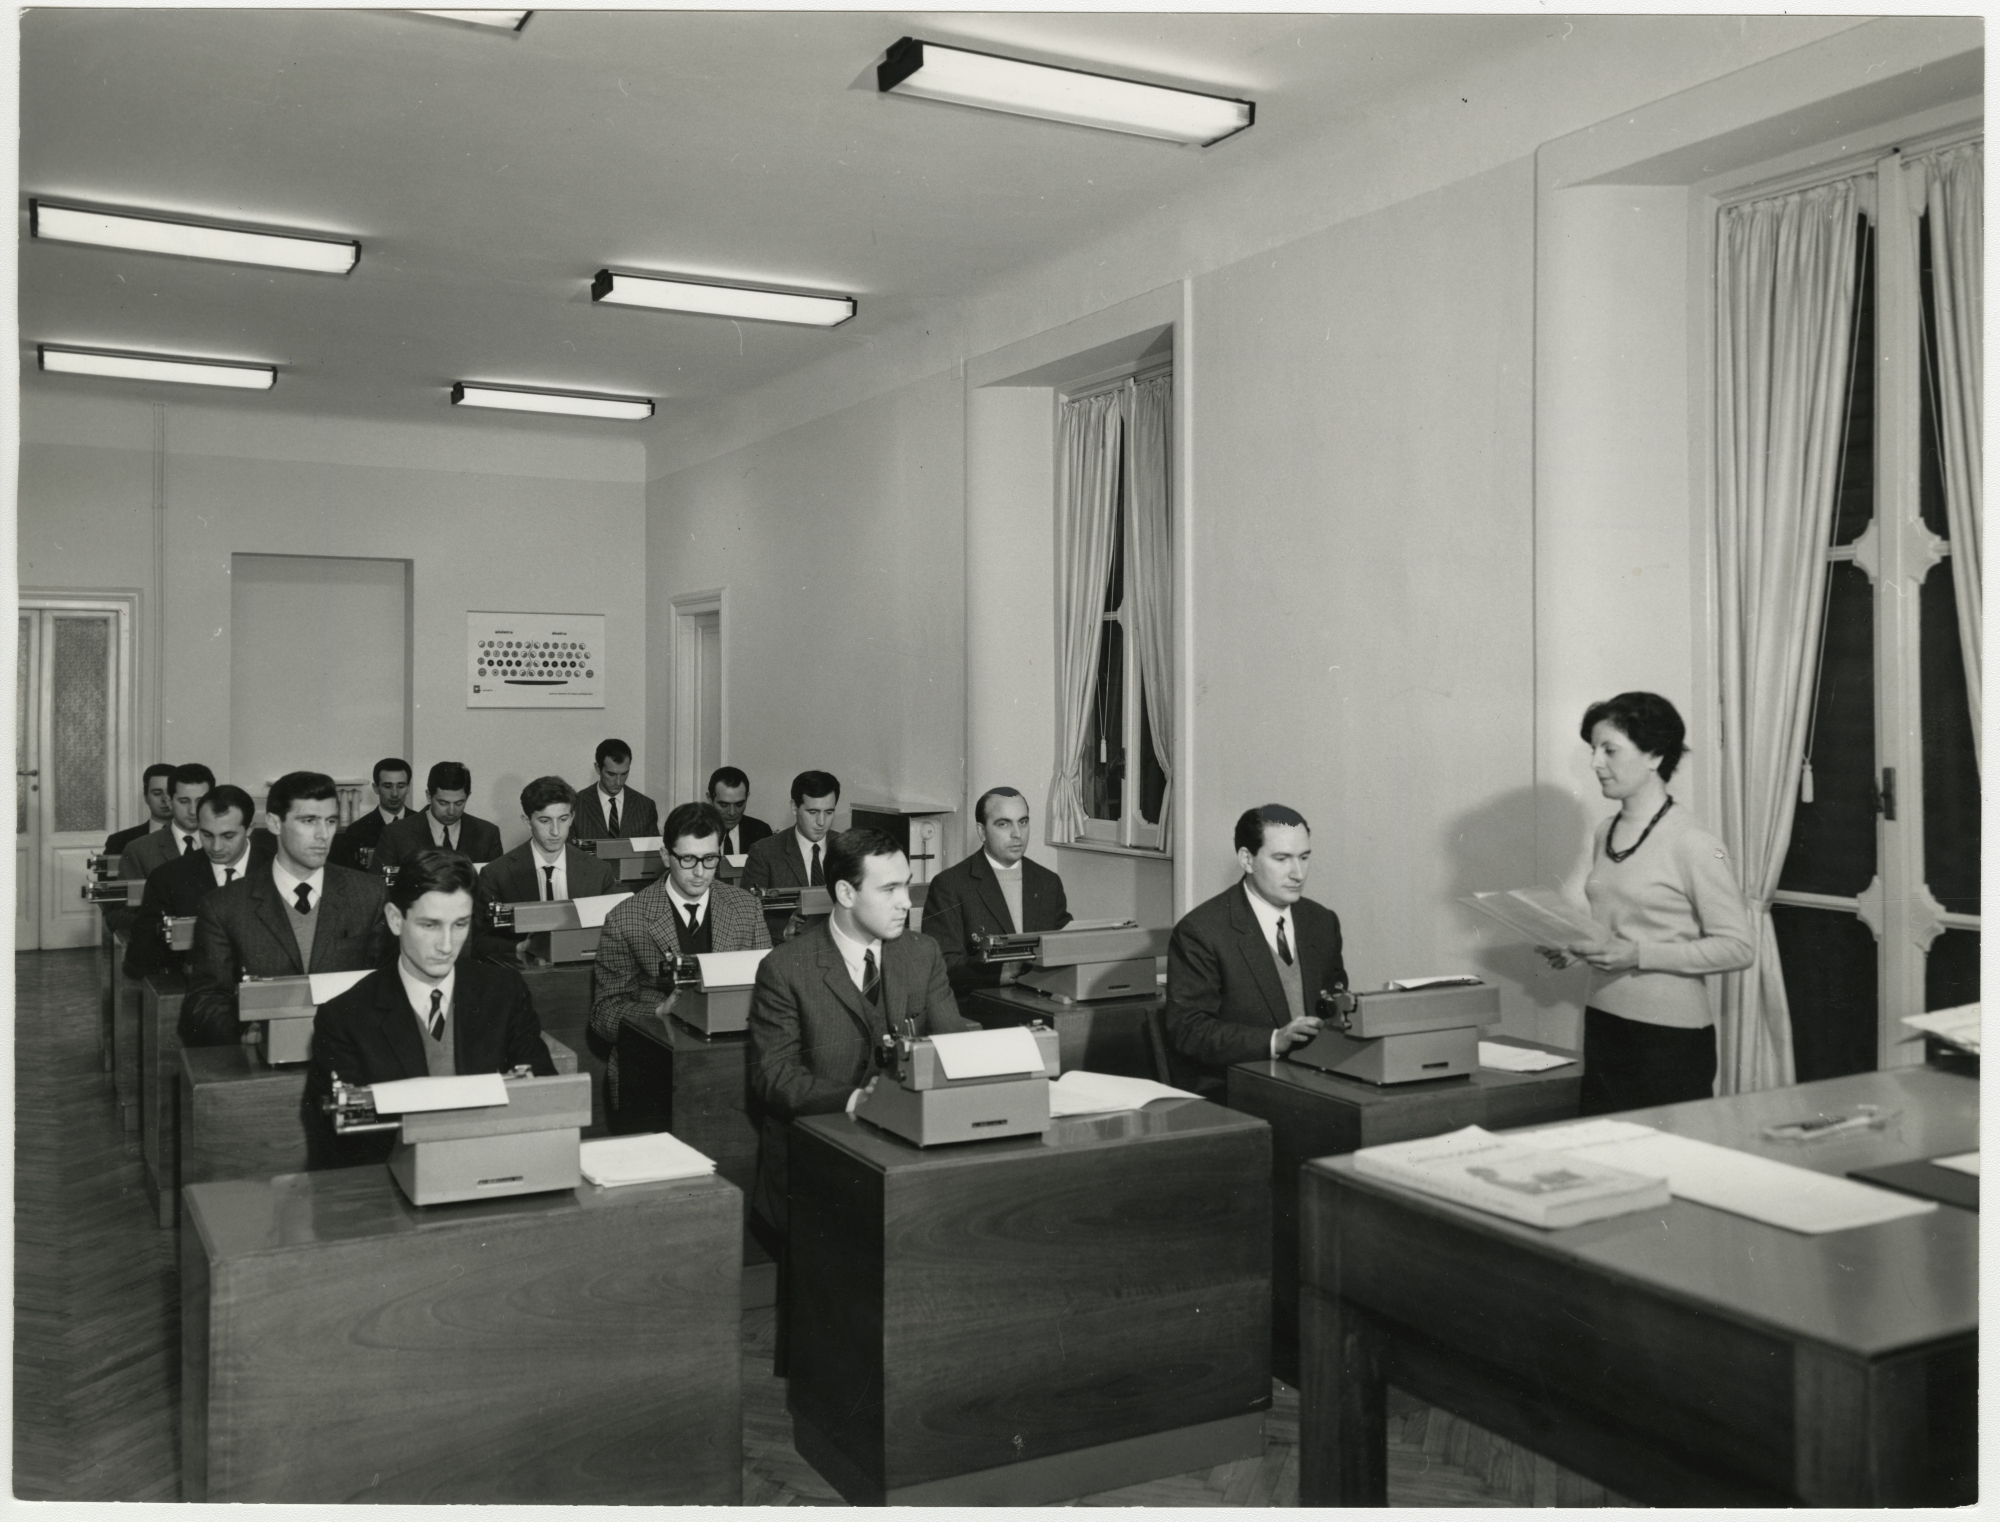 Training course for the staff of Cassa di Risparmio delle Provincie Lombarde, teaching them to use an Olivetti typewriter, 1965